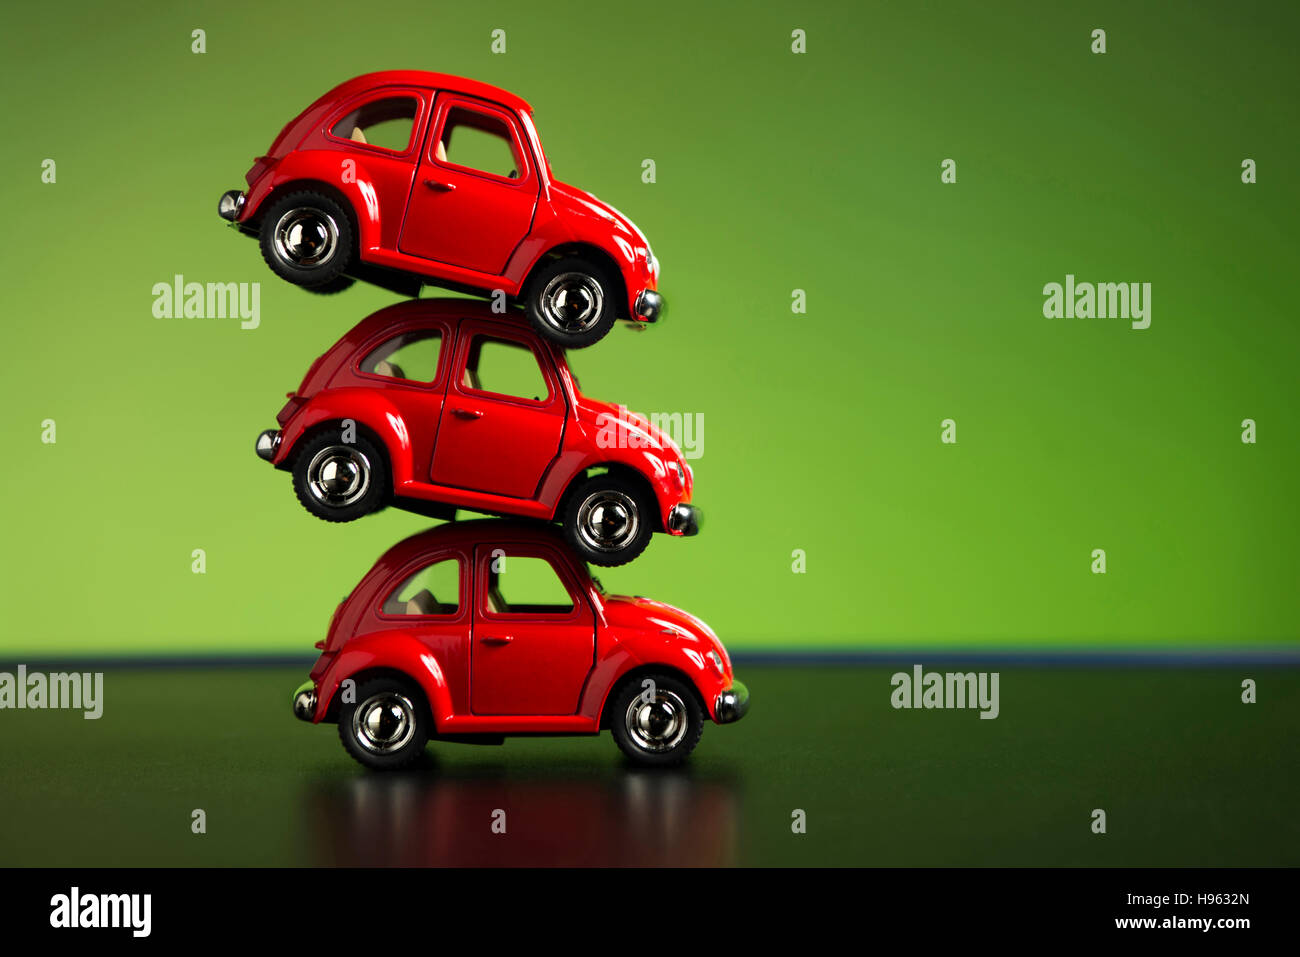 Izmir, Turkey - July 23, 2015. Stacked 3 red Volkswagen beetles on a green background. Stock Photo